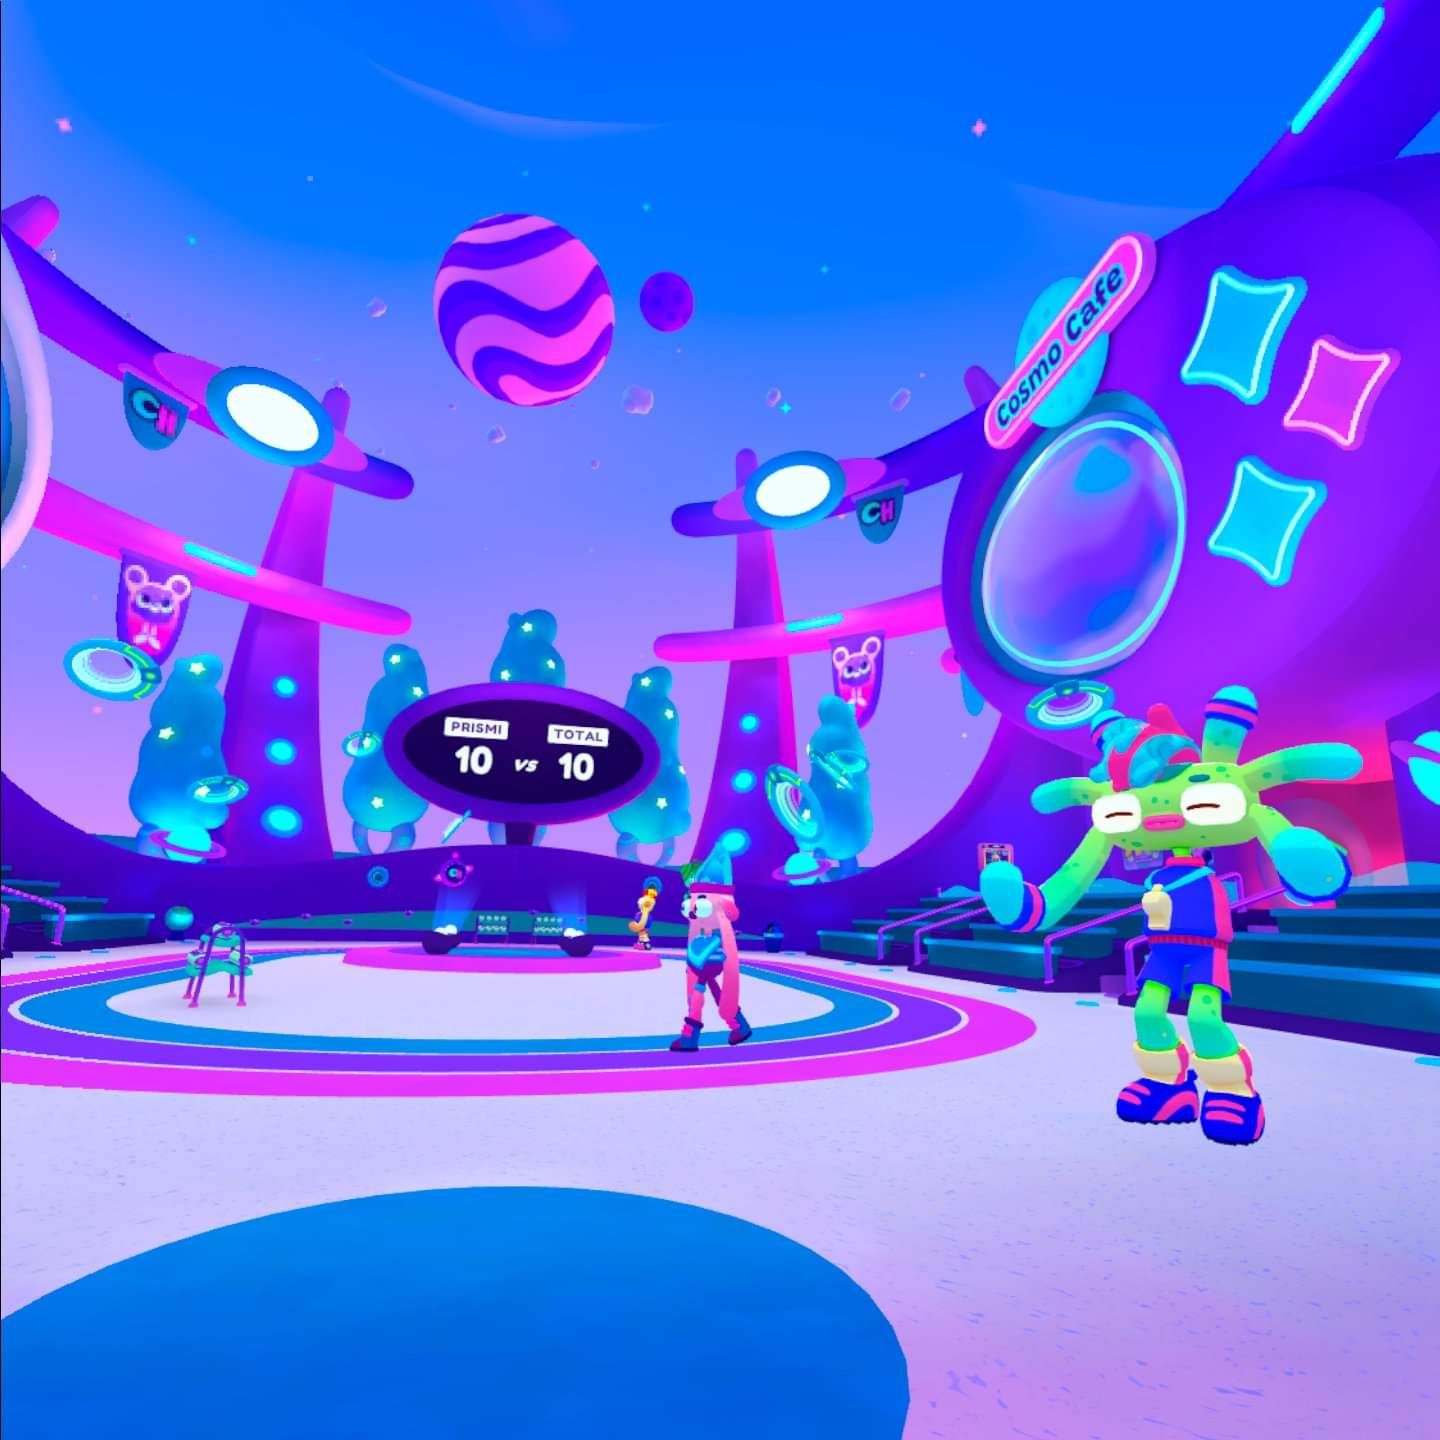 Cosmonious High Review: A Charming & Lively VR Adventure